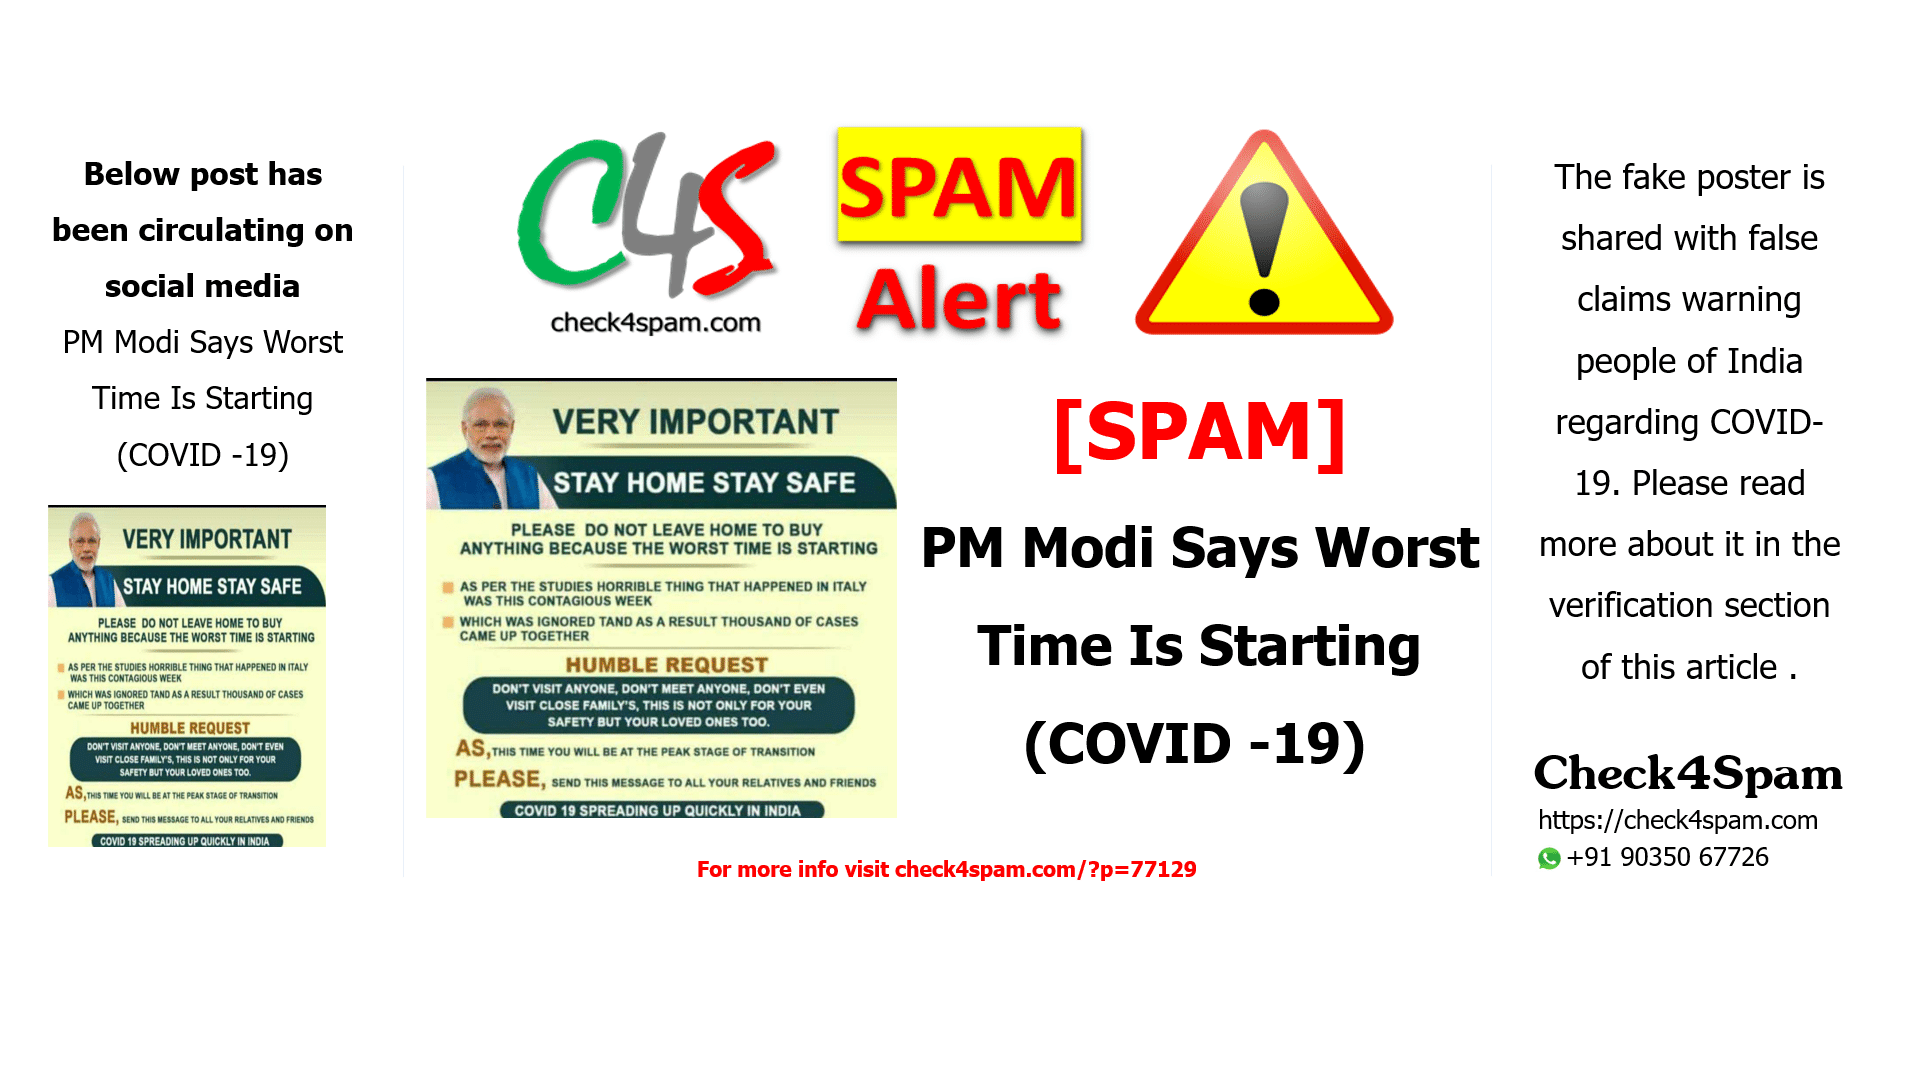 PM Modi Says Worst Time Is Starting (COVID -19)